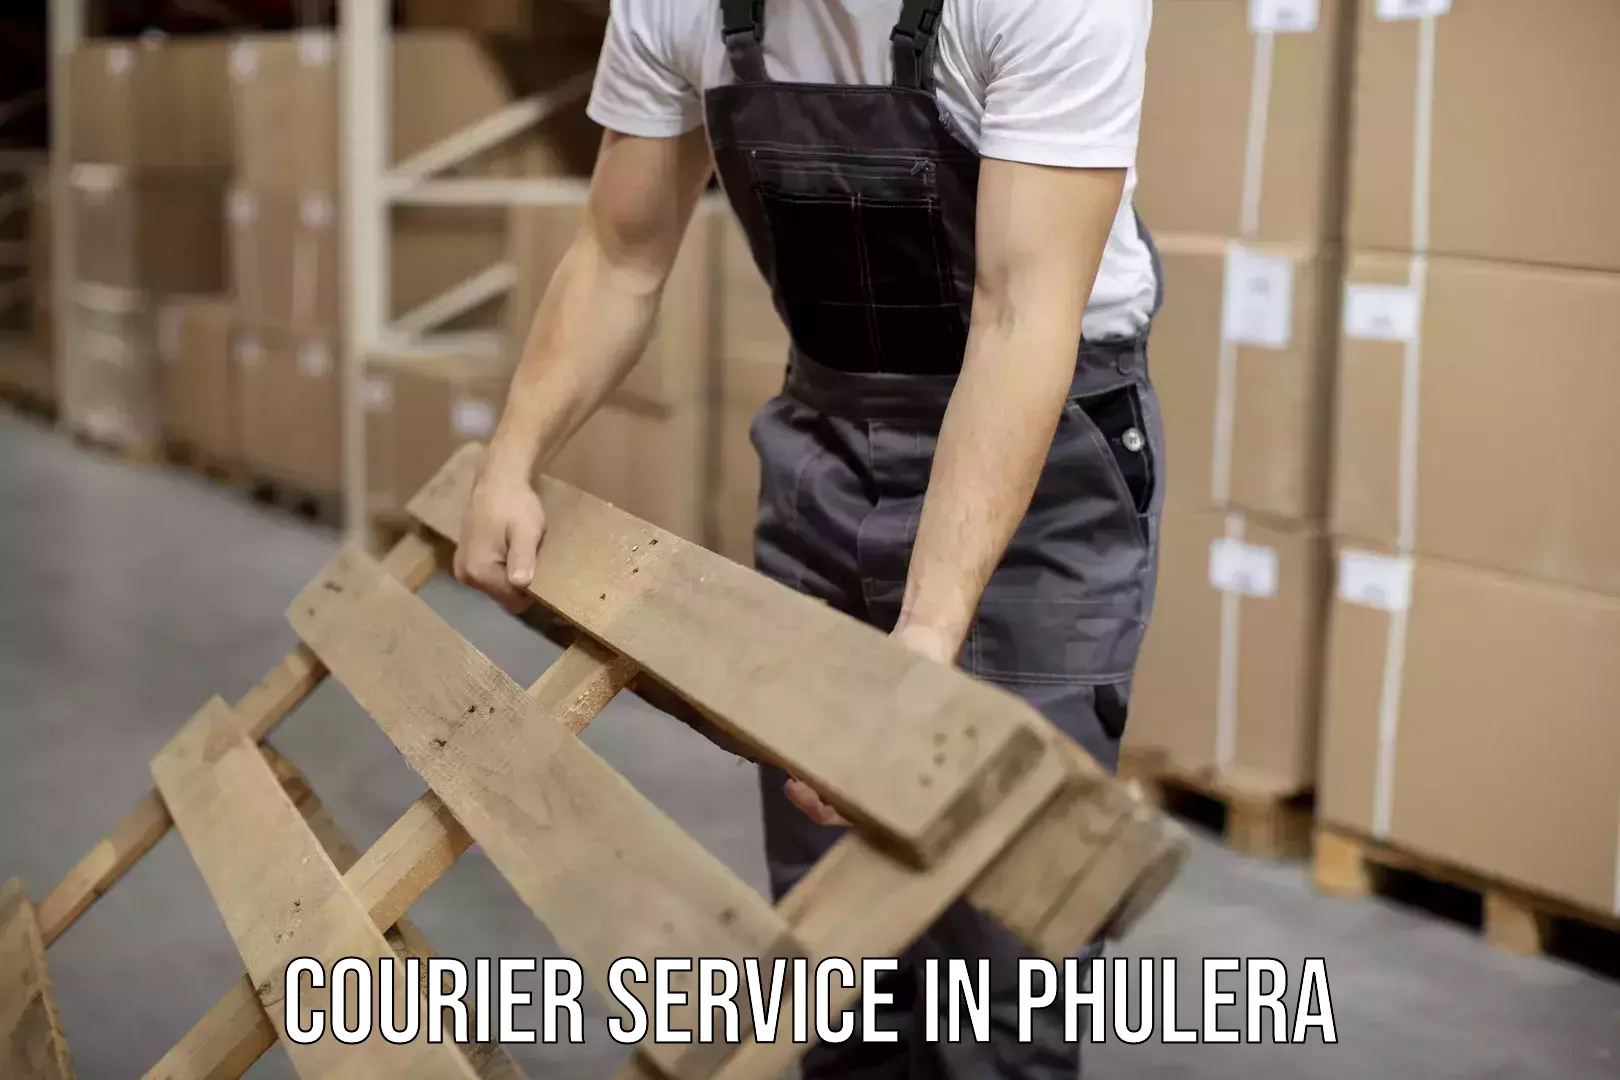 Full-service courier options in Phulera